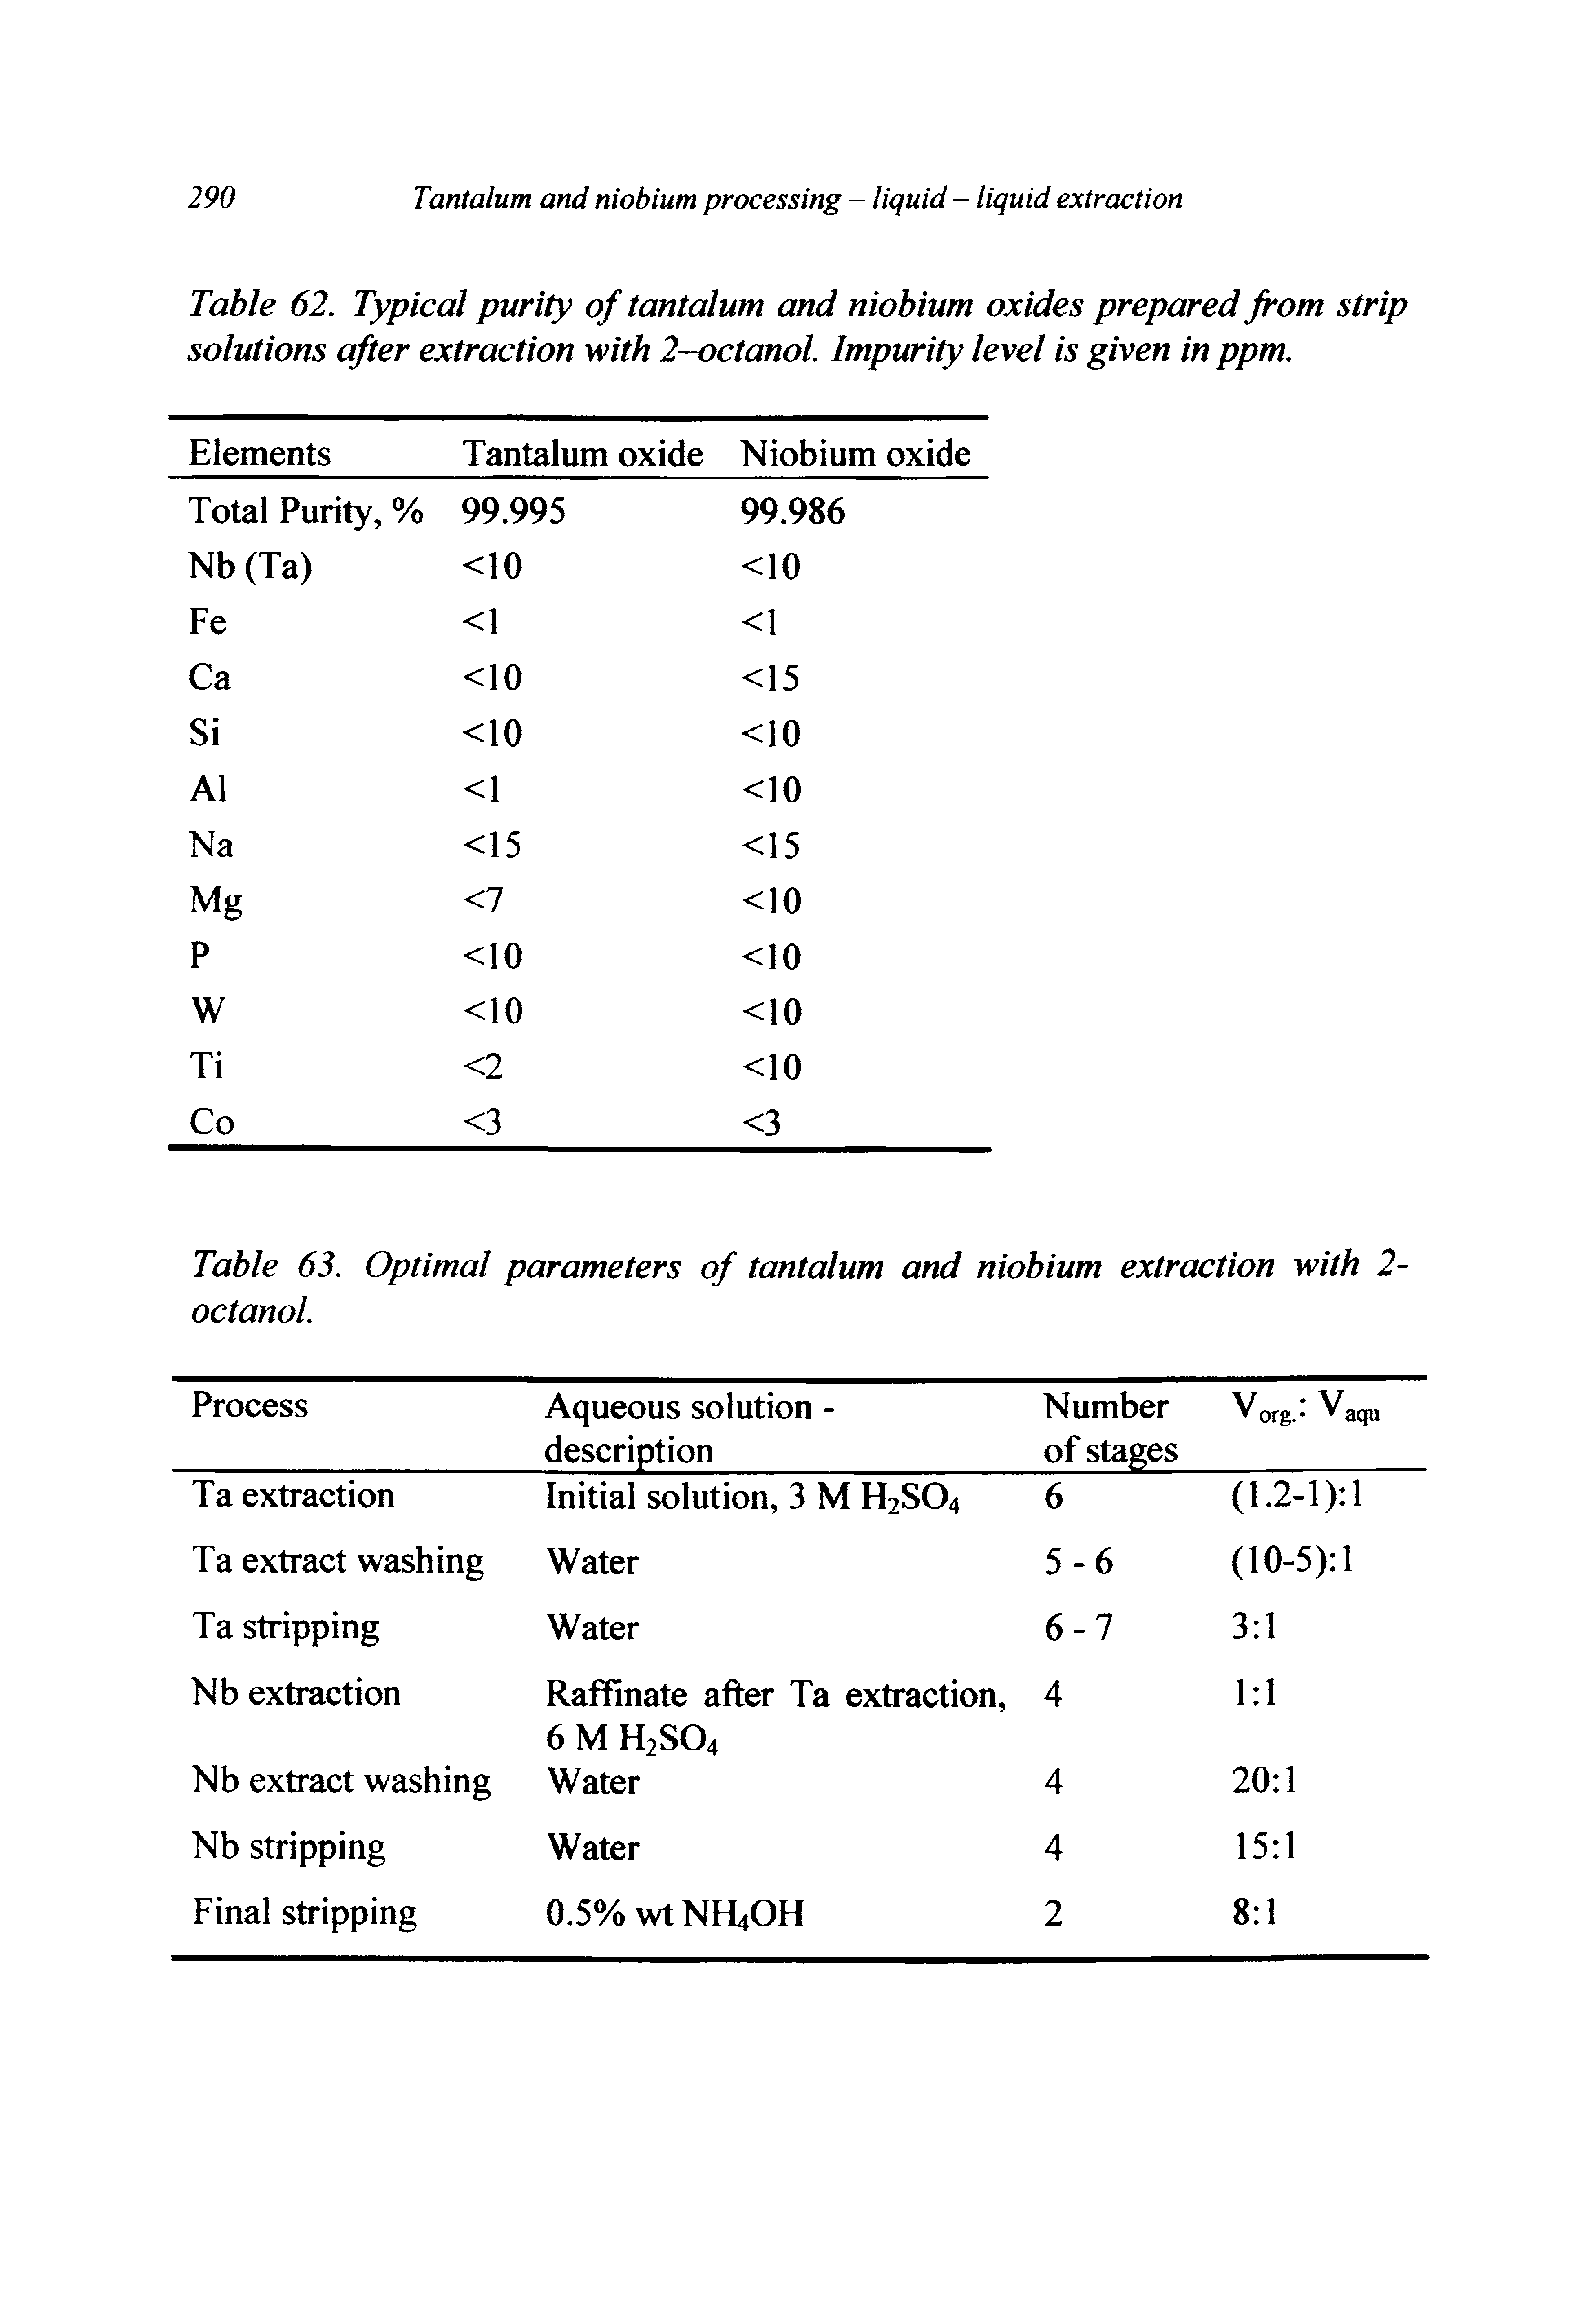 Table 62. Typical purity of tantalum and niobium oxides prepared from strip solutions after extraction with 2-octanol. Impurity level is given in ppm.